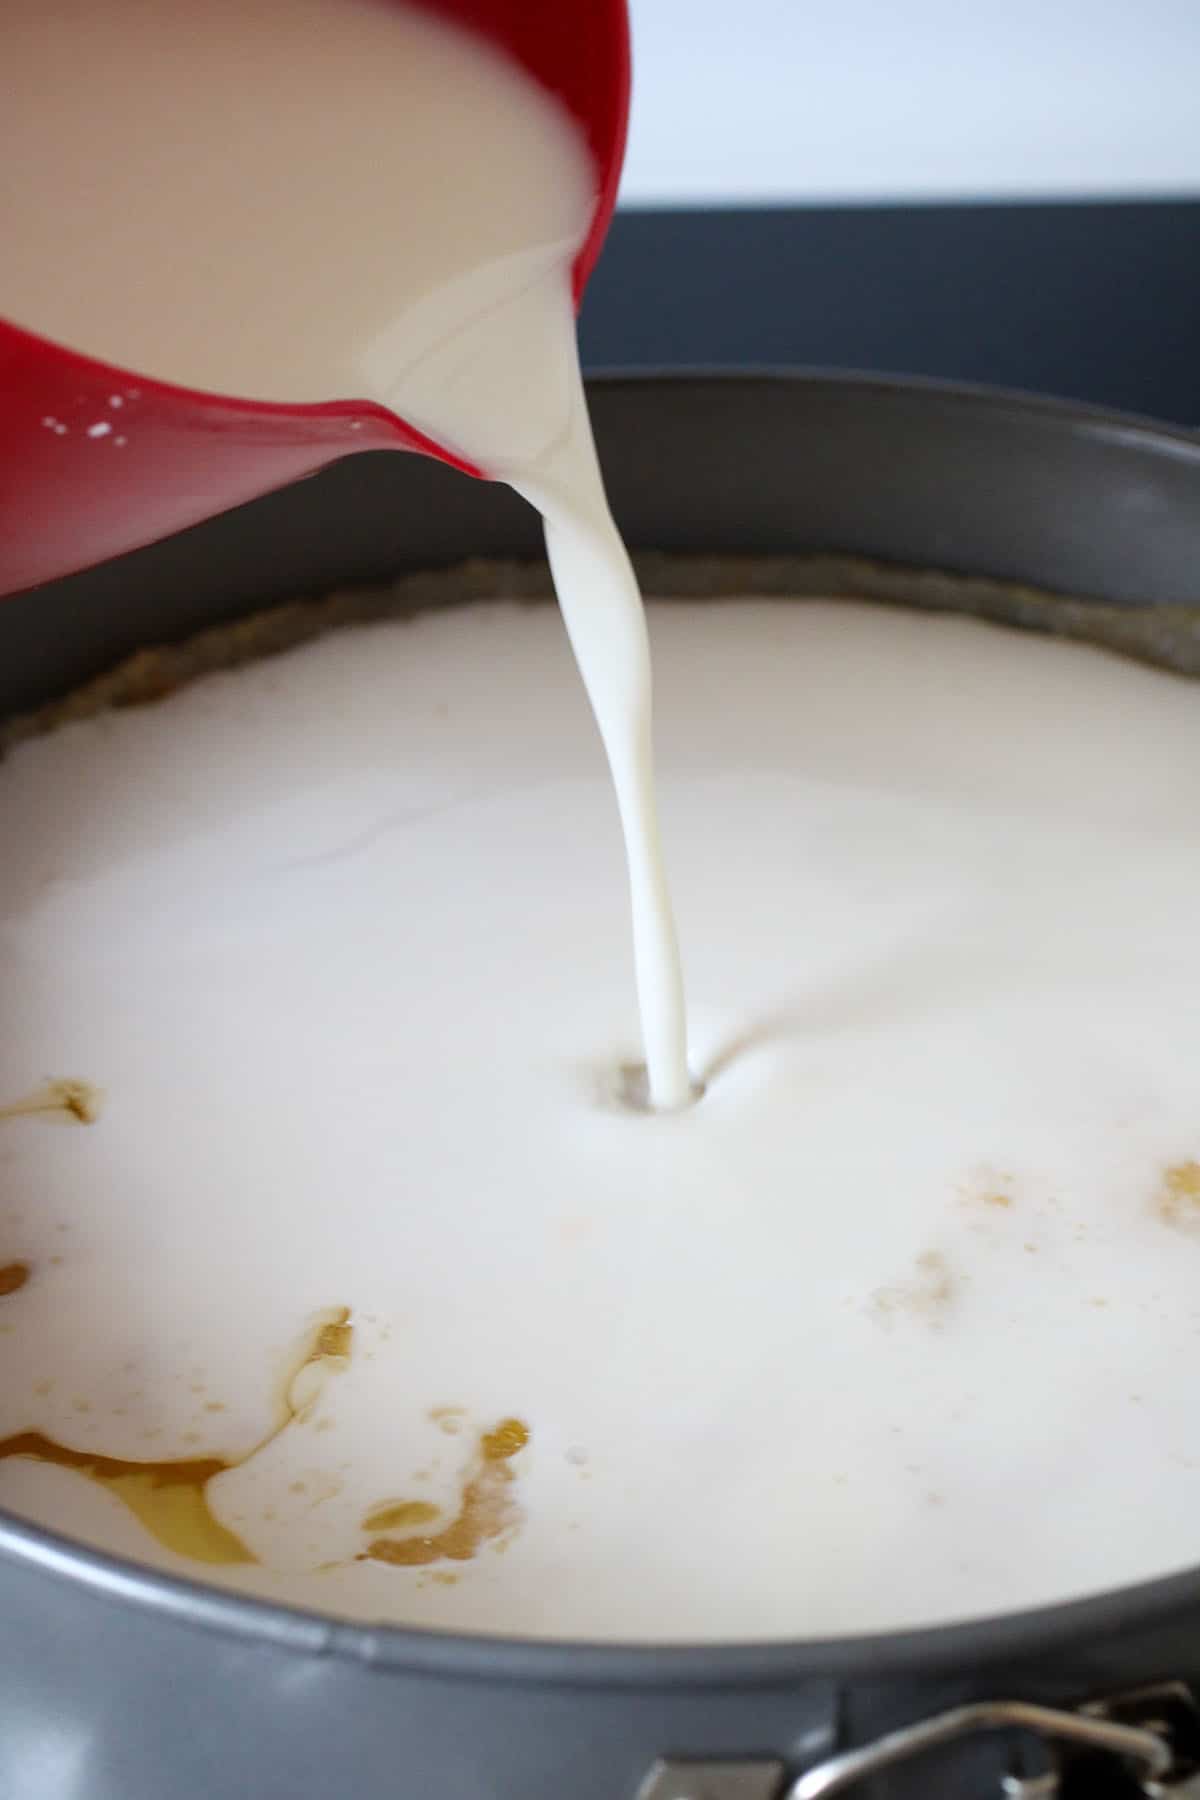 Pouring the milk topping over the cassava base.